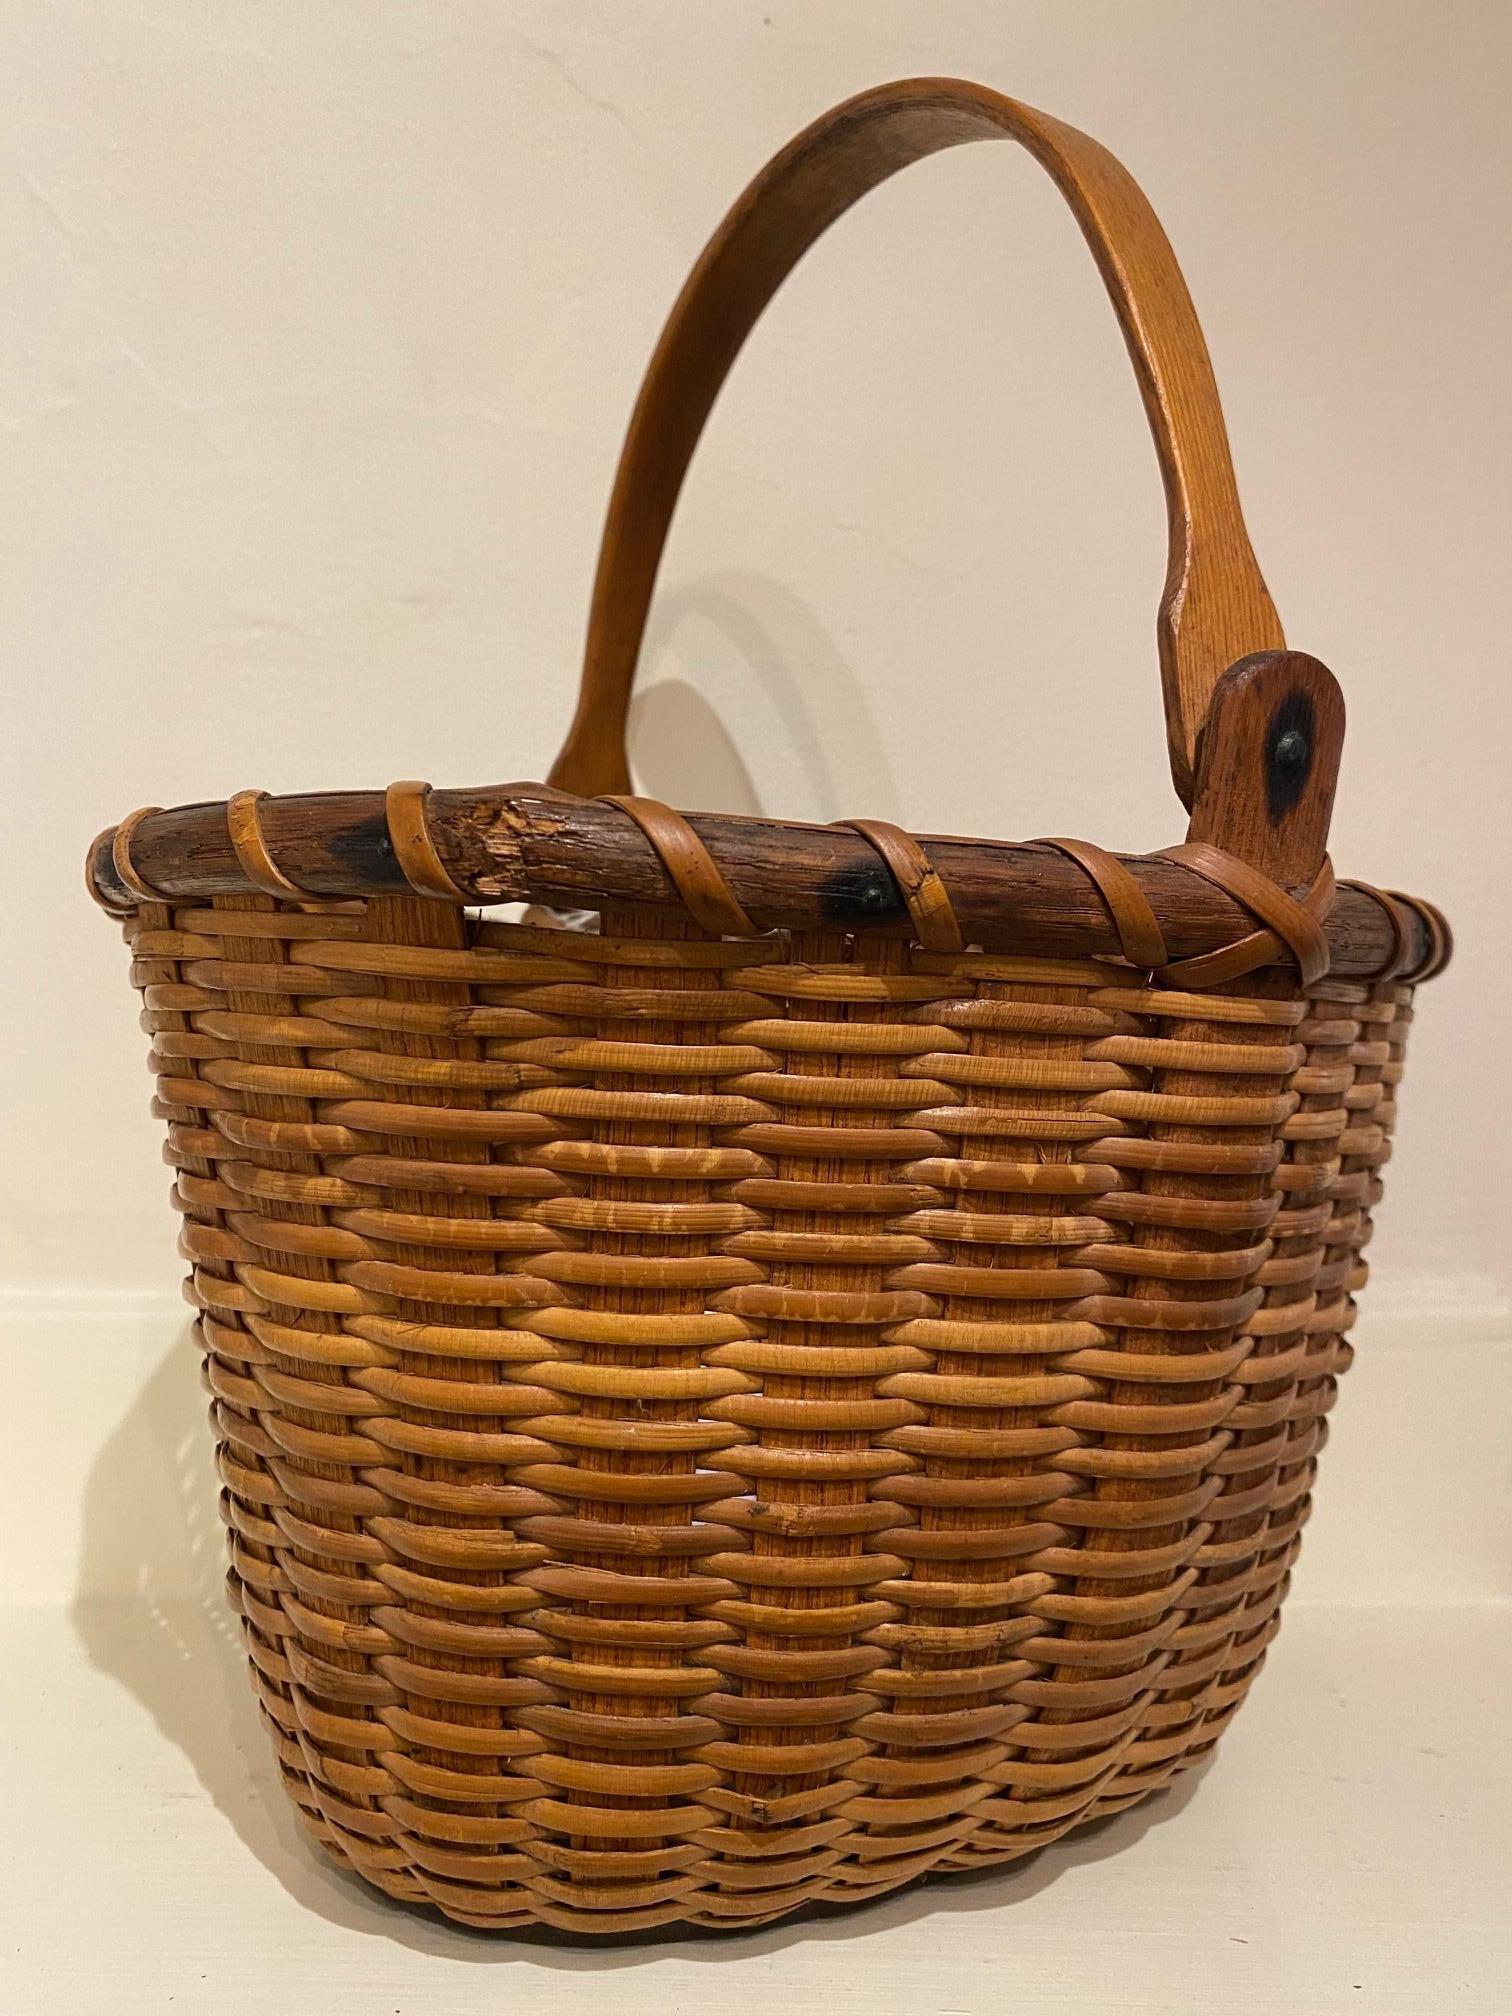 Very Early Nantucket lightship basket, circa 1860, an oval open basket with wide splint staves, split wood rim, cane weave, solid birch bottom plate, and shaped swing handle attached by rivet to the heavy ears which are continuous as staves inserted